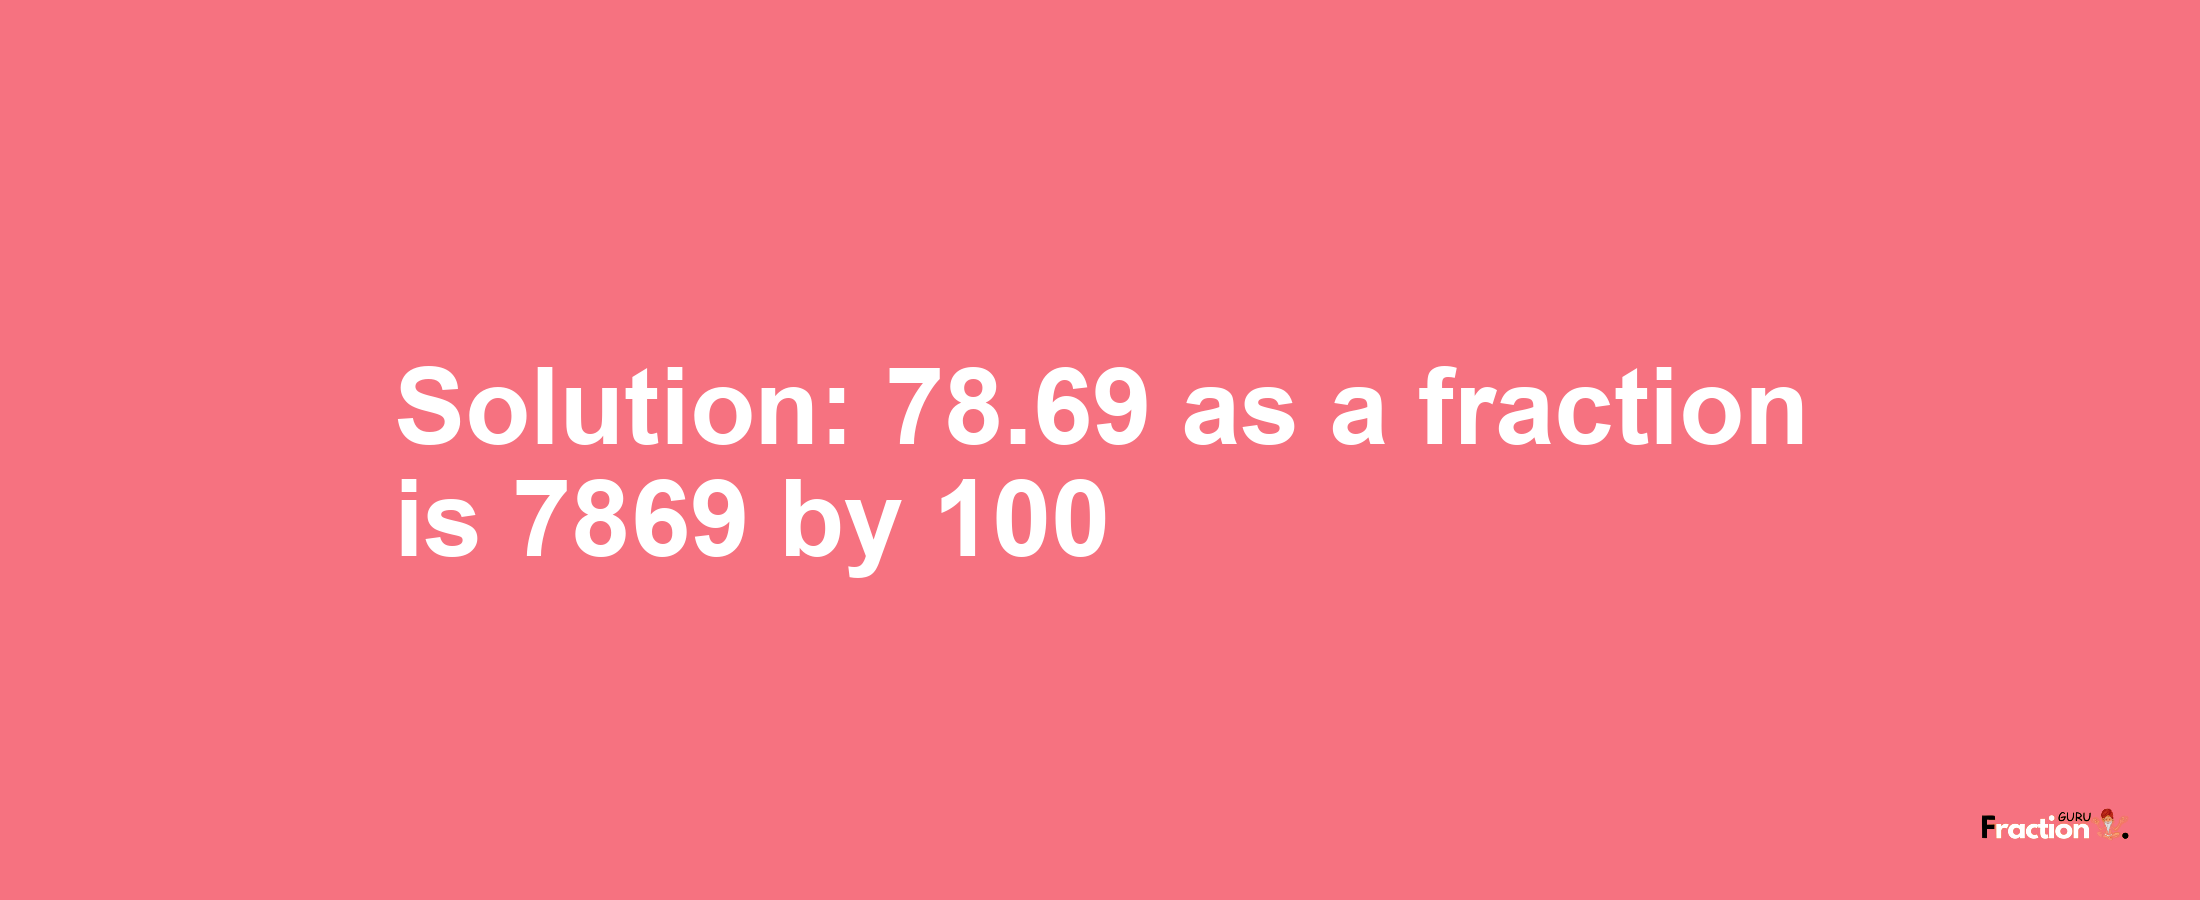 Solution:78.69 as a fraction is 7869/100